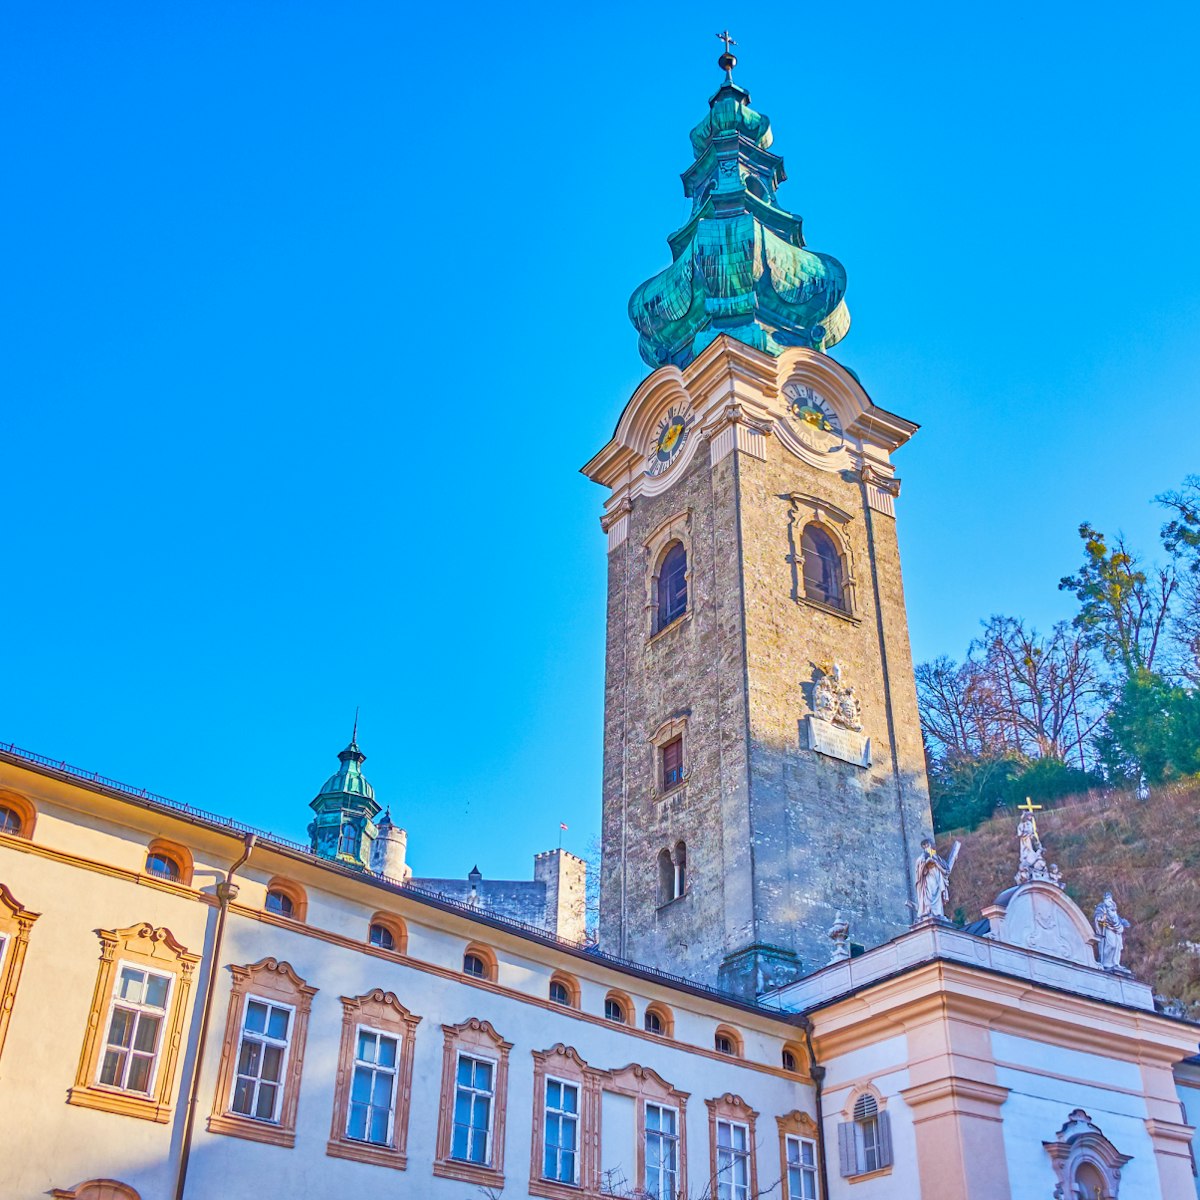 The mighty bell tower of the Collegiate Church of Abbey of St.Peter complex with greenery of Monchsberg hill on the background, Salzburg, Austria; Shutterstock ID 1478477327; Your name (First / Last): Lauren Vastine; GL account no.: 65050; Netsuite department name: Online Editorial; Full Product or Project name including edition: BiT2020 Imagery